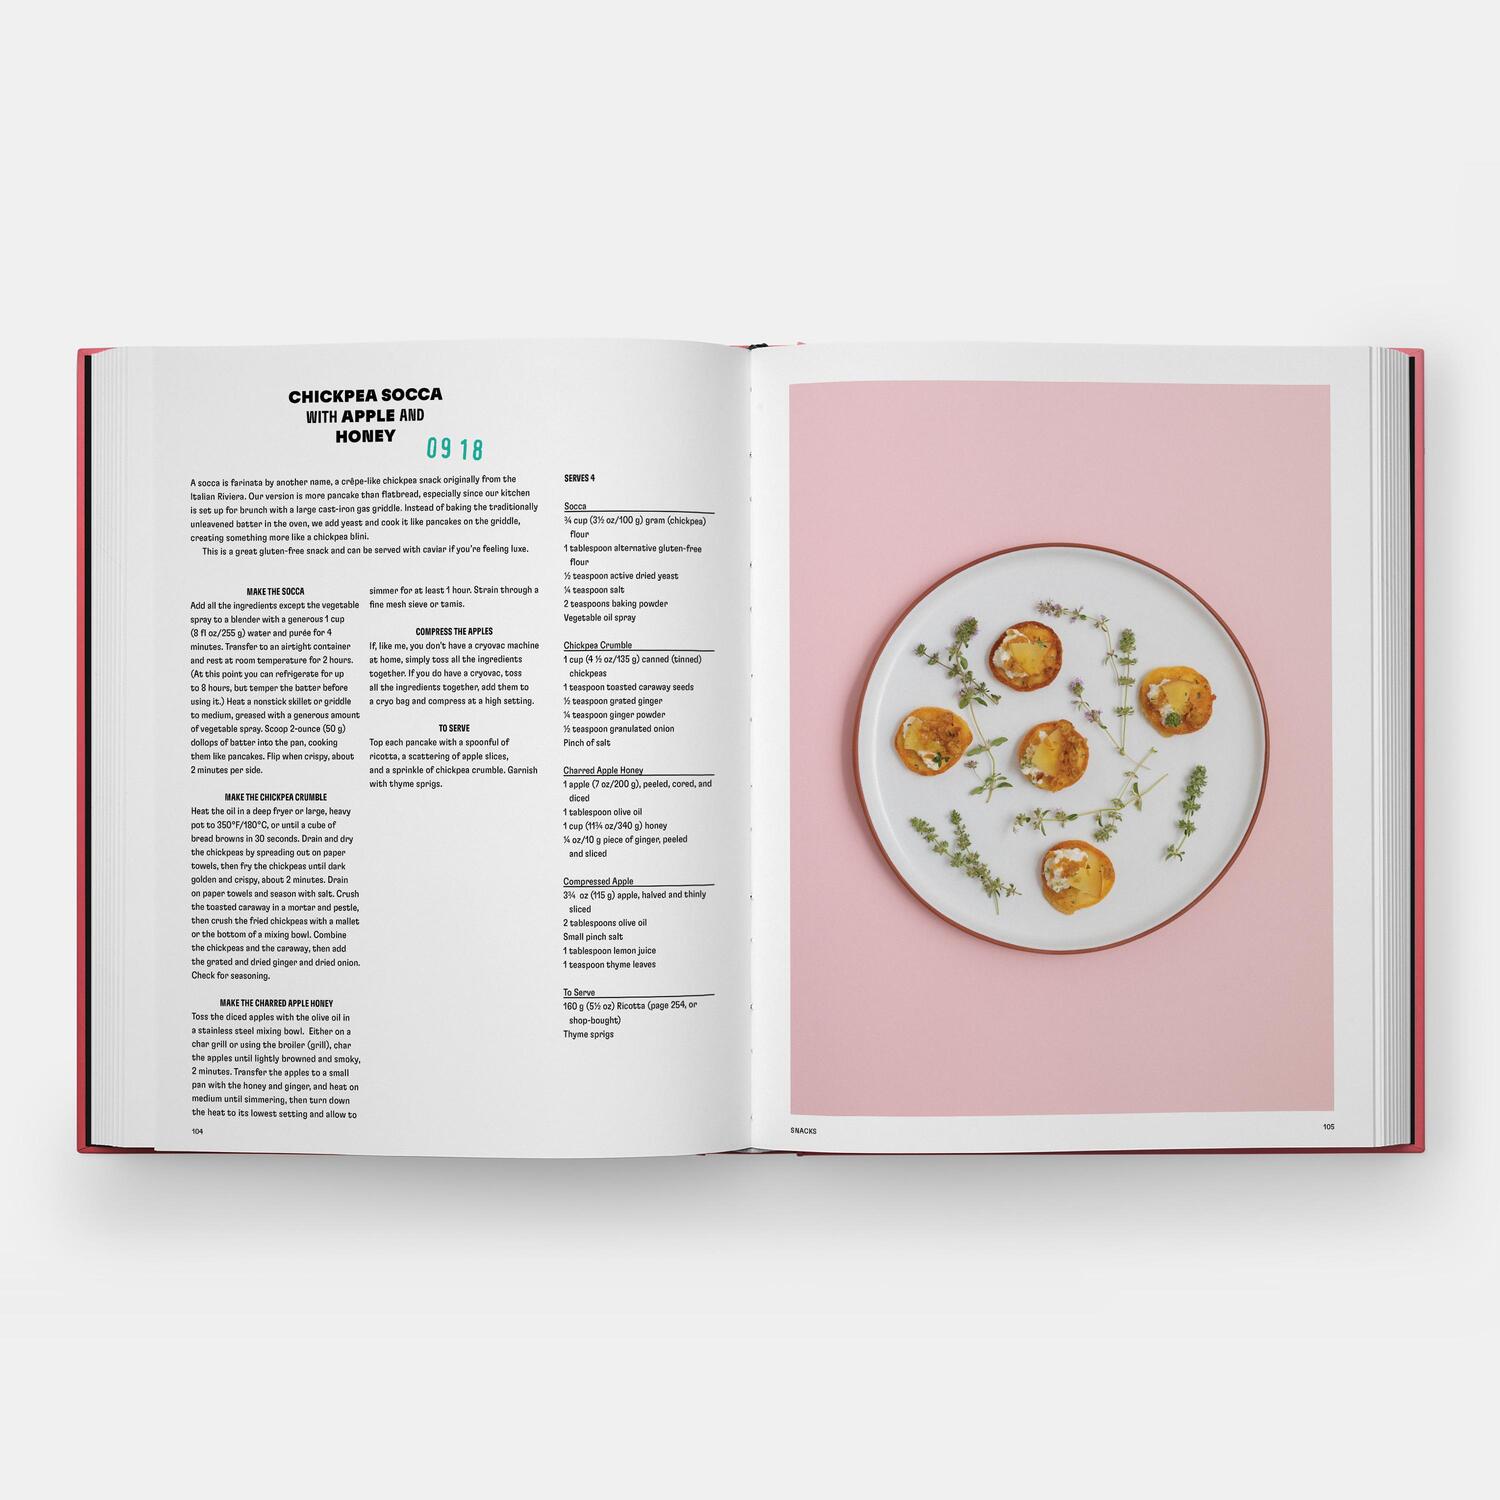 Bild: 9781838667535 | The Lula Cafe Cookbook | Collected Recipes and Stories | Jason Hammel